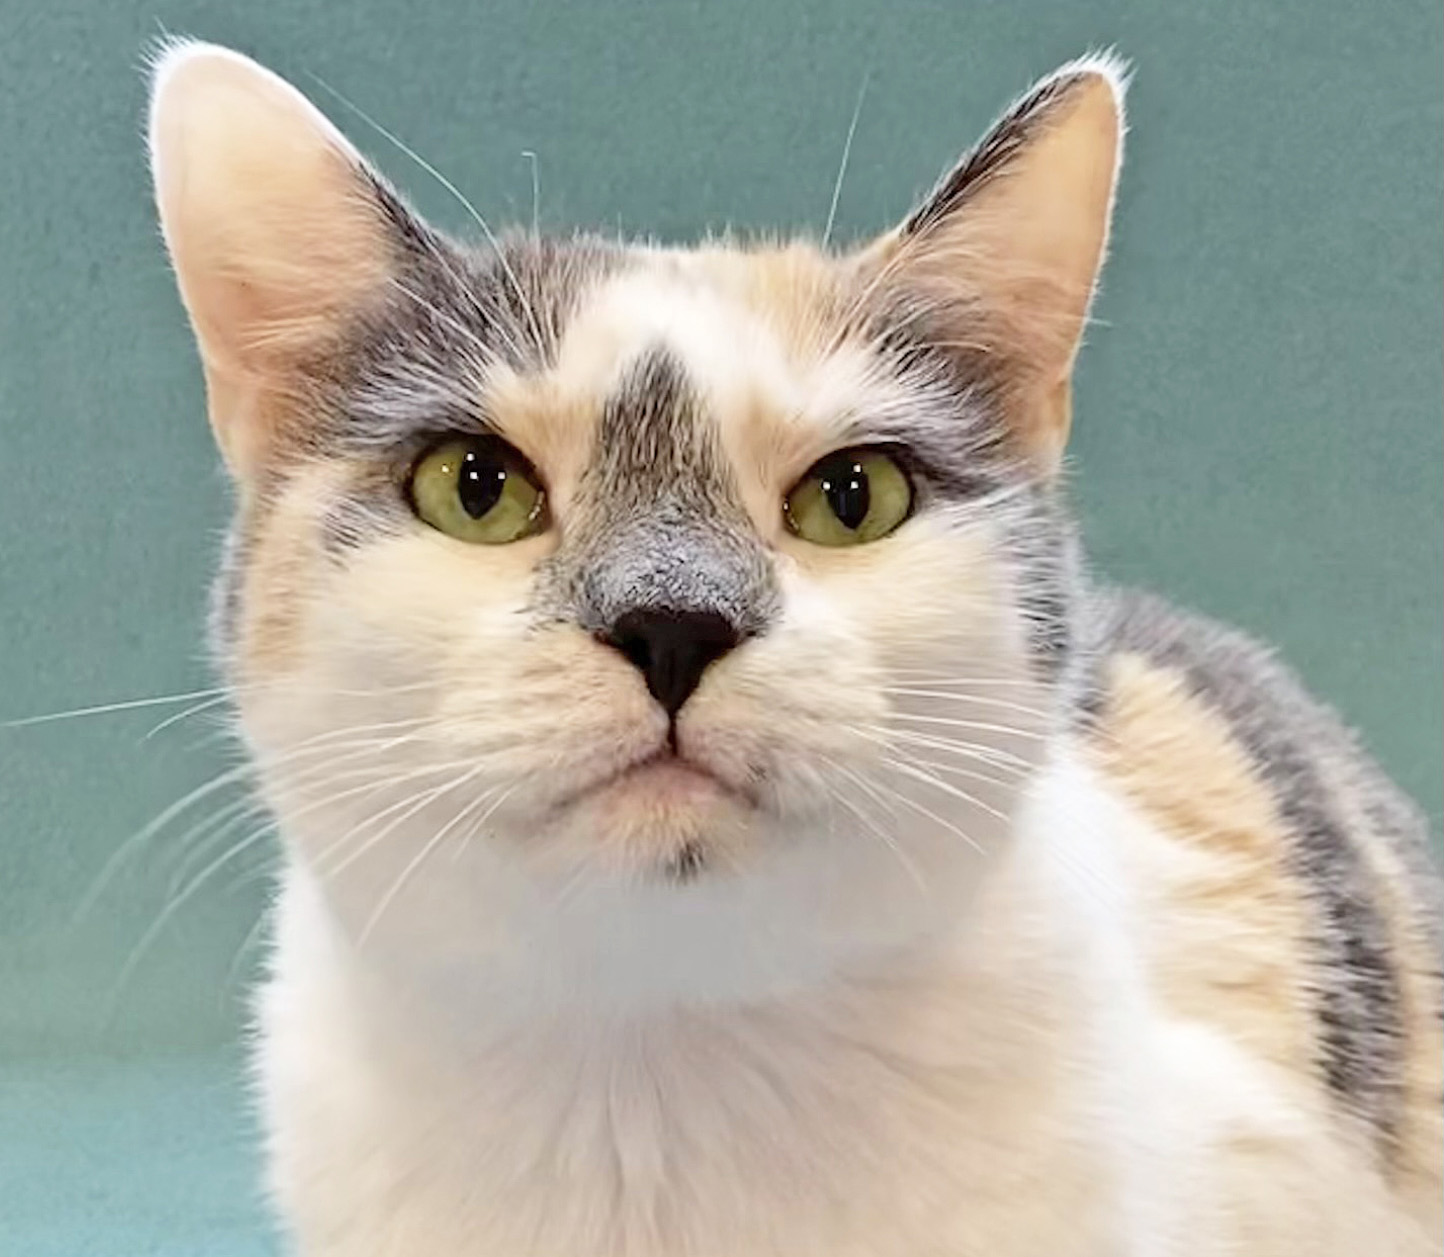 Happy Cats Haven – Pet of the Week: Hello! I’m Leesi! I’m a gorgeous calico girl with lovely yellow-green eyes. I’m a Hemo Hero; I used to donate blood for other kitties at a blood bank! I came to Happy Cats after I retired, and now I’m ready to find a loving home of my own. I’m a gentle girl and really prefer human companionship over other pets. I don’t get along well with dogs, and young children are just too rambunctious. I may be OK with another mild-mannered cat, but dominant kitty personalities are too much for me. I’m about 8 years old, and through August you can adopt me for $30, which includes my spay, vaccinations, microchip, food and litter starter kit, a free well-kitty checkup and a dental procedure. Happy Cats Haven: 719-362-4600, 327 Manitou Ave. Adoptions by appointment only until further notice.www.HappyCatsHaven.org, www.Facebook.com/HappyCatsHaven.